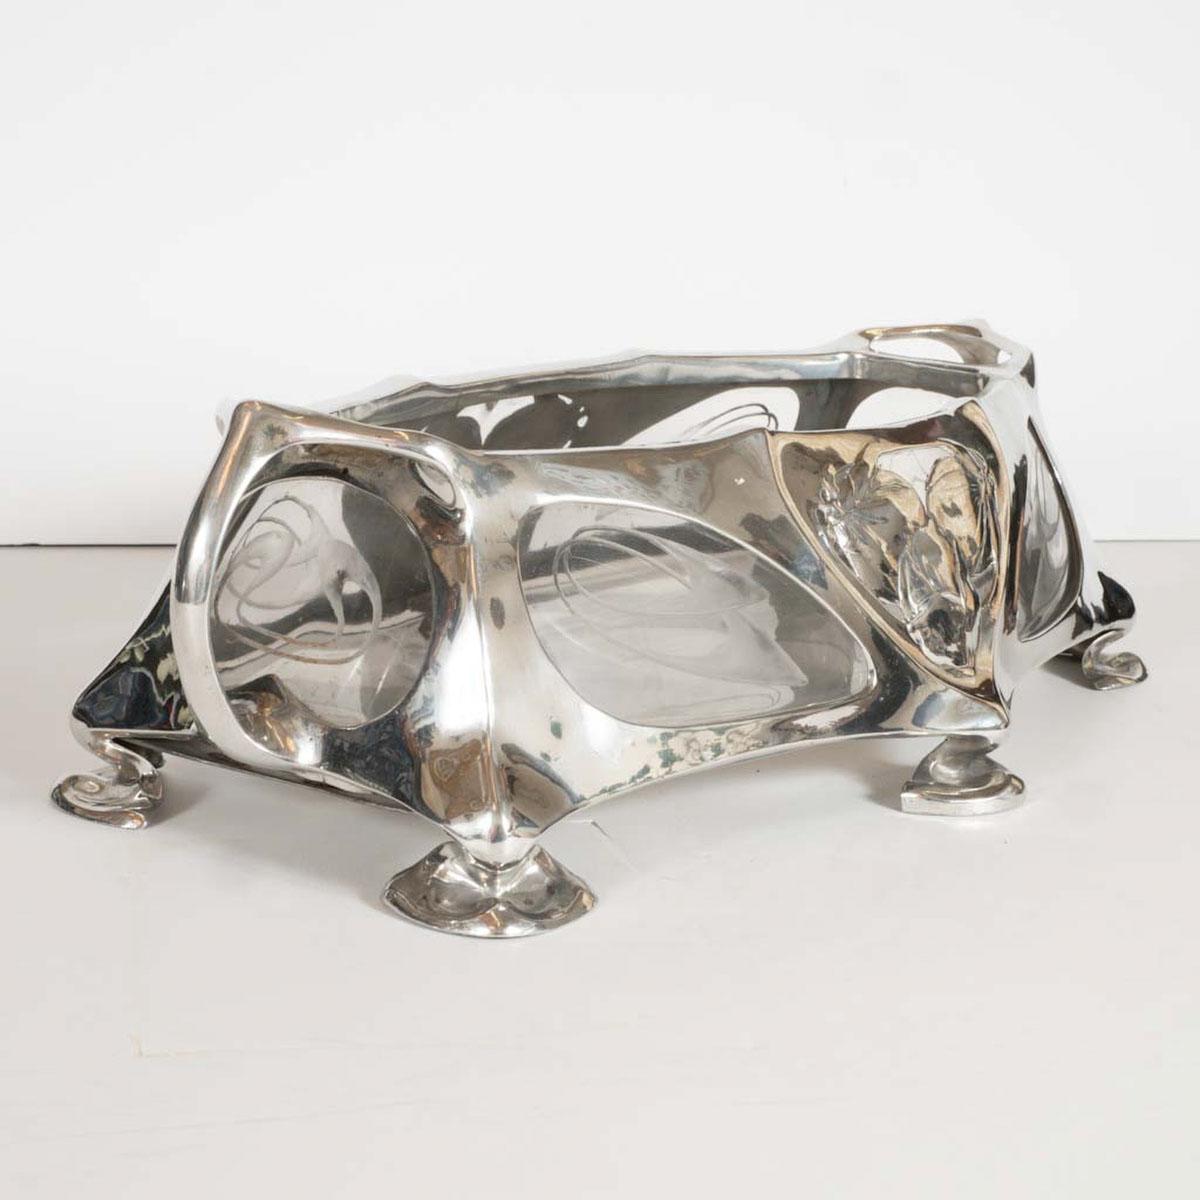 Sculptural foliate motif cast and silvered bronze box with interior etched glass.